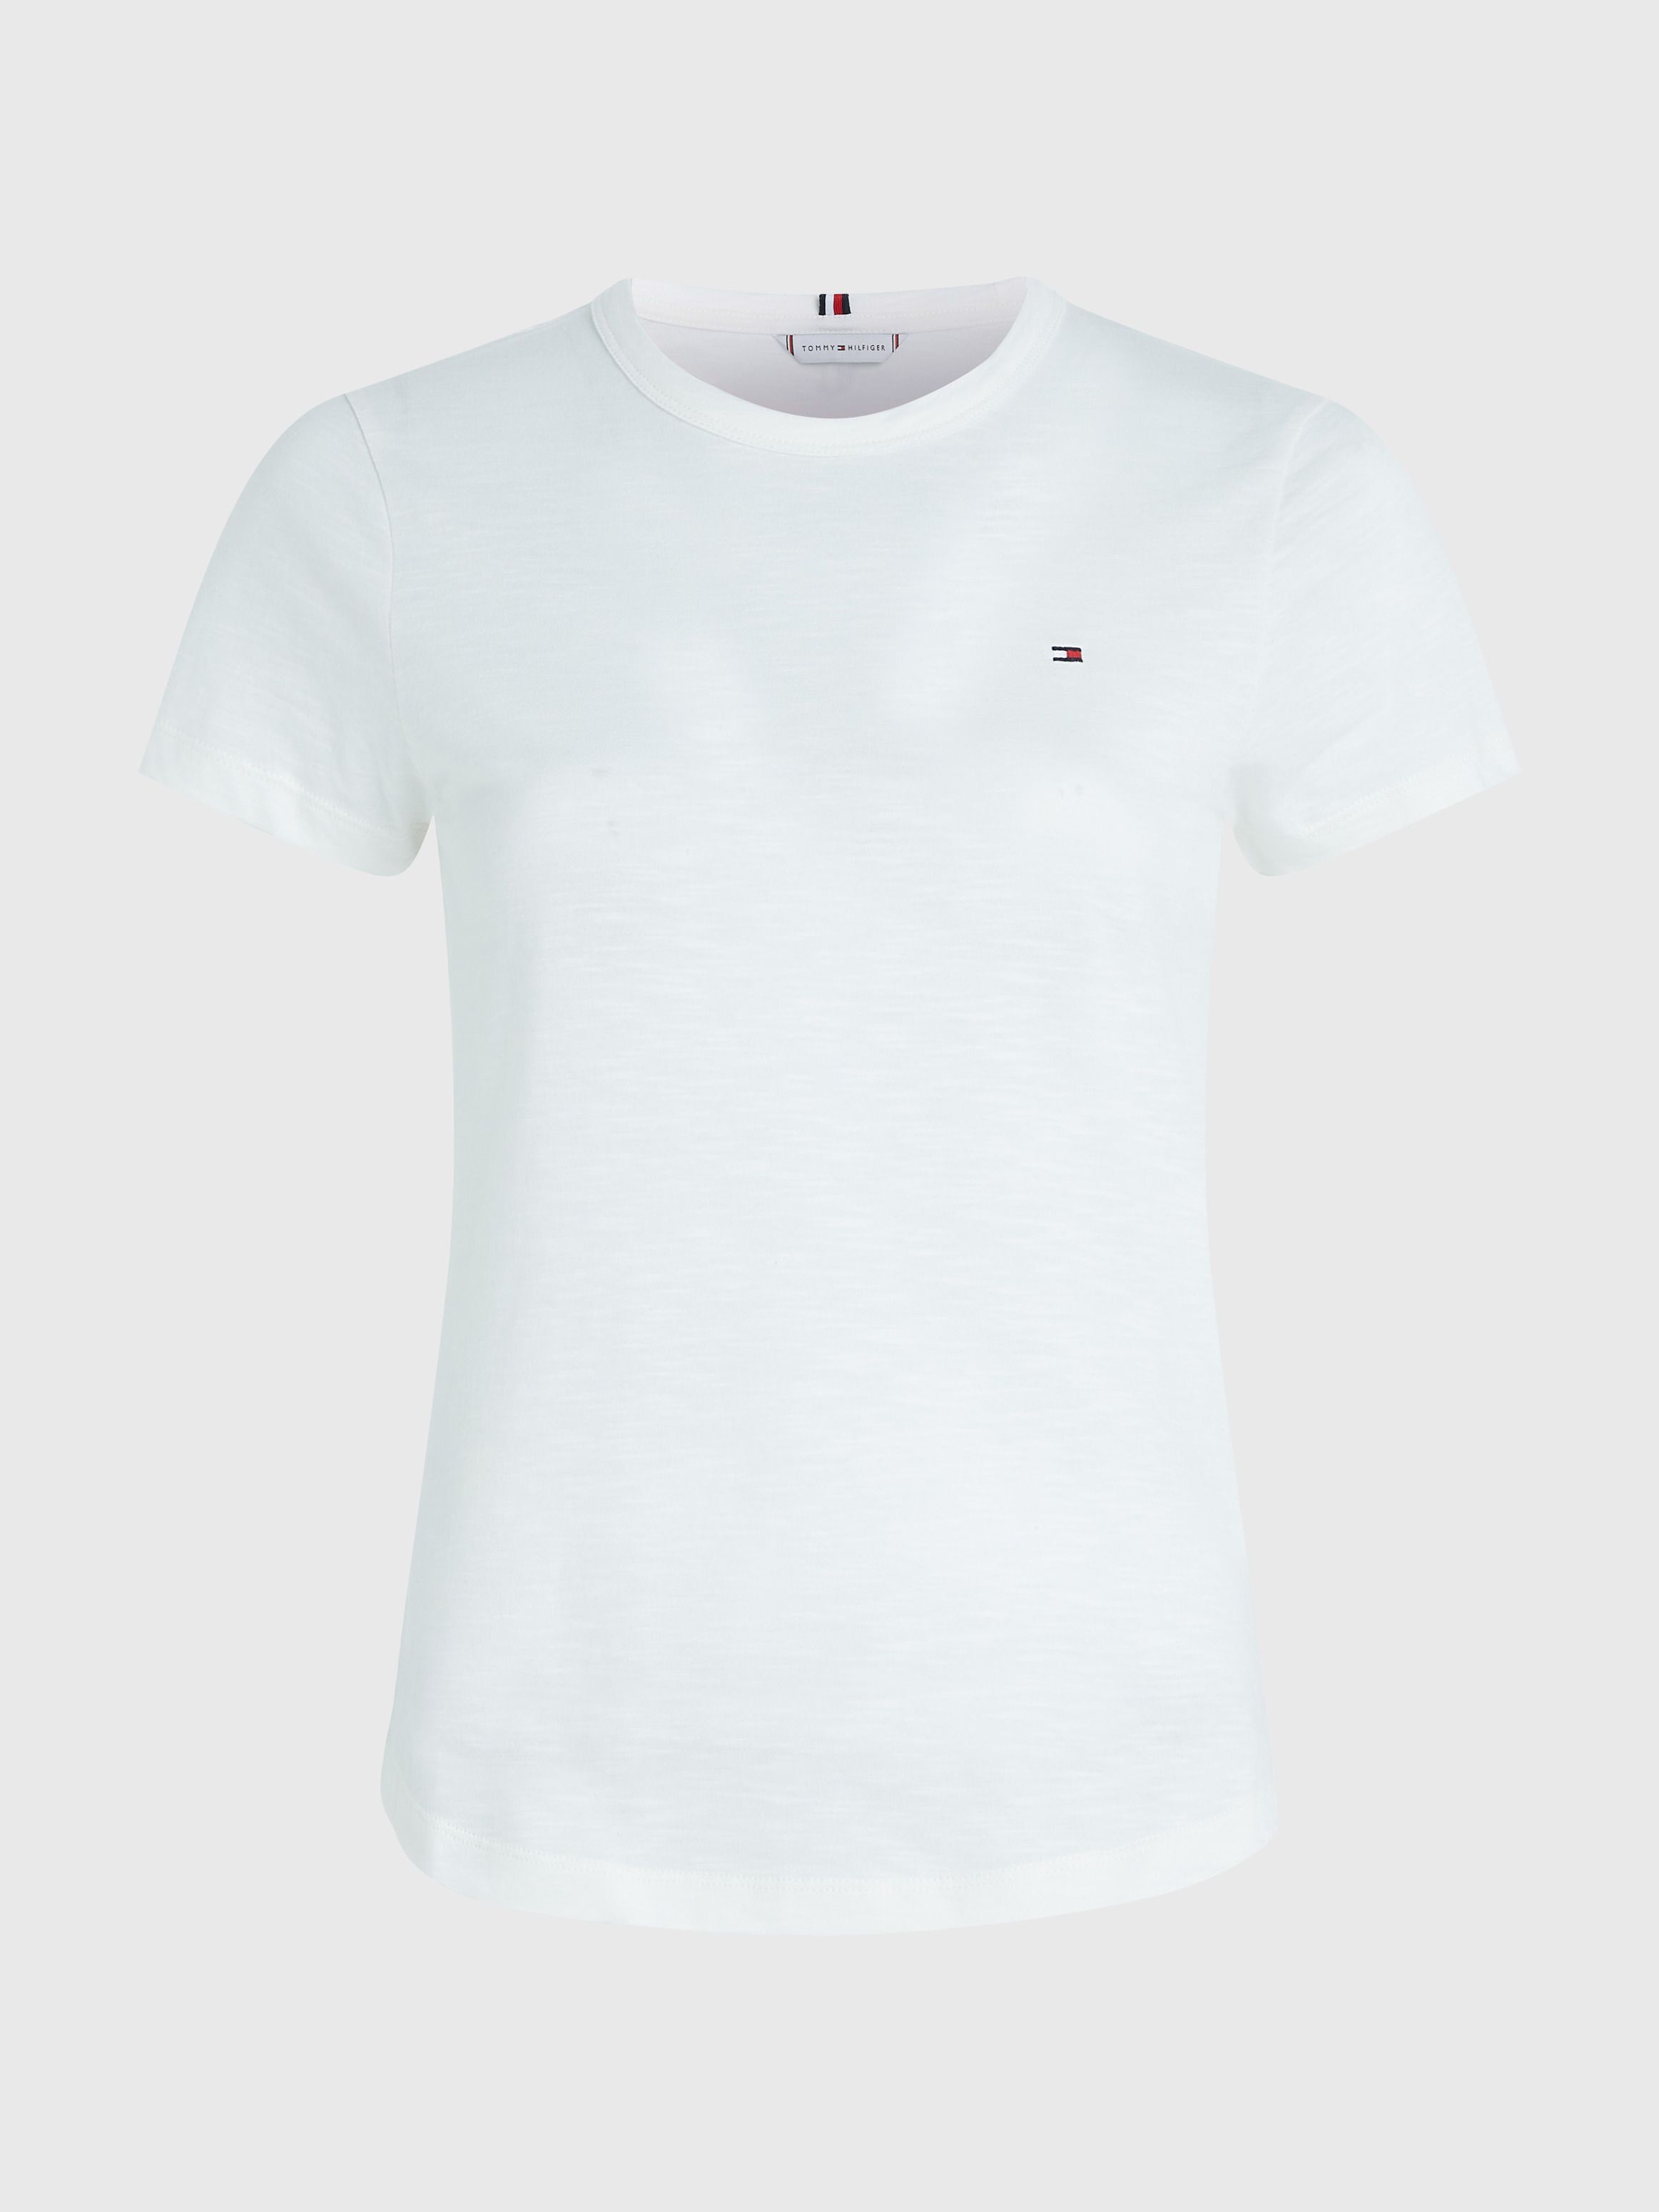 1985 Collection Slim Fit T-Shirt | Tommy Hilfiger